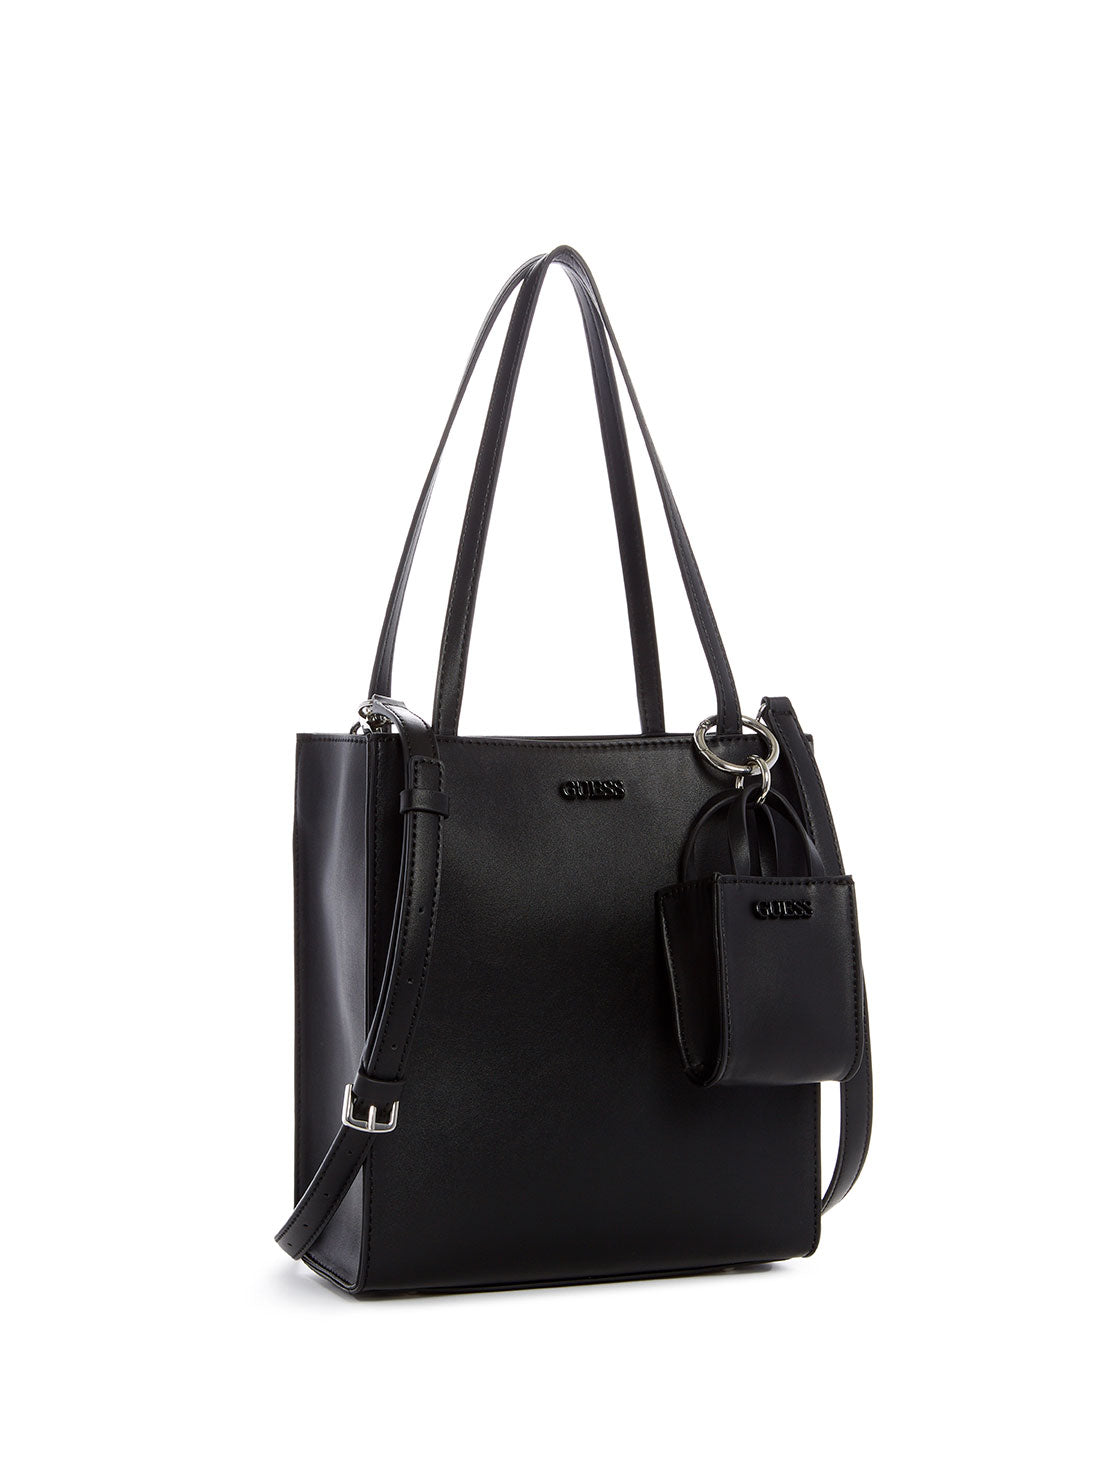 GUESS Women's Black Picnic Tote Bag VY786522 Angle View